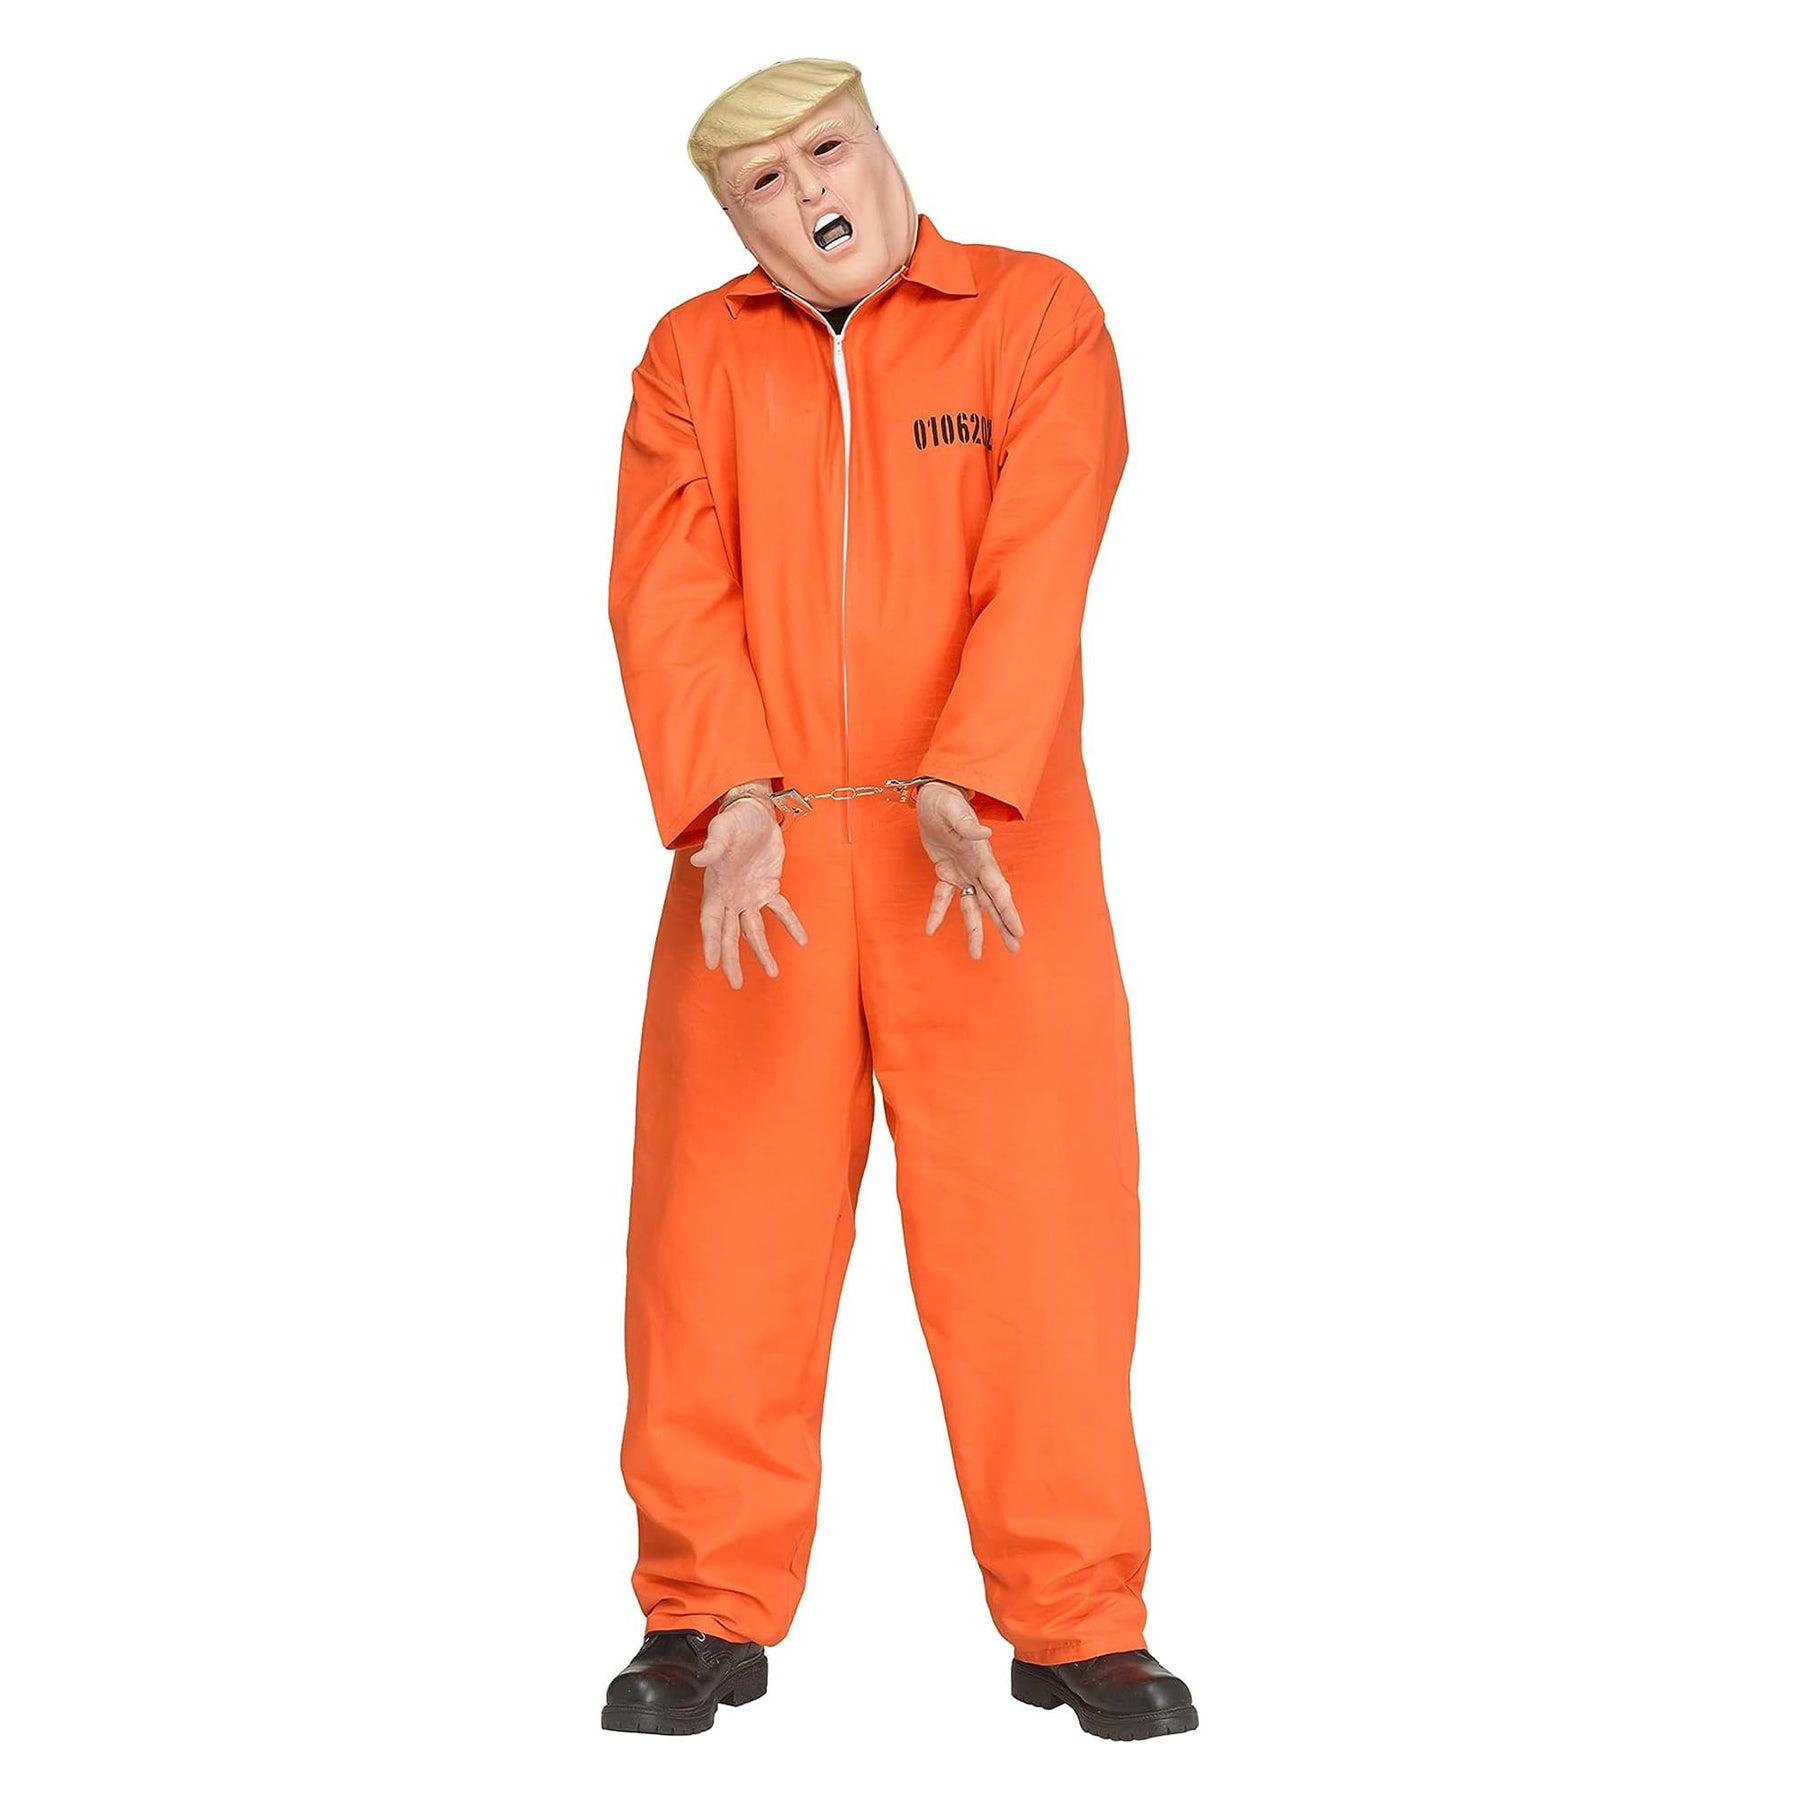 Commander-In-Cuffs Adult Costume | One Size